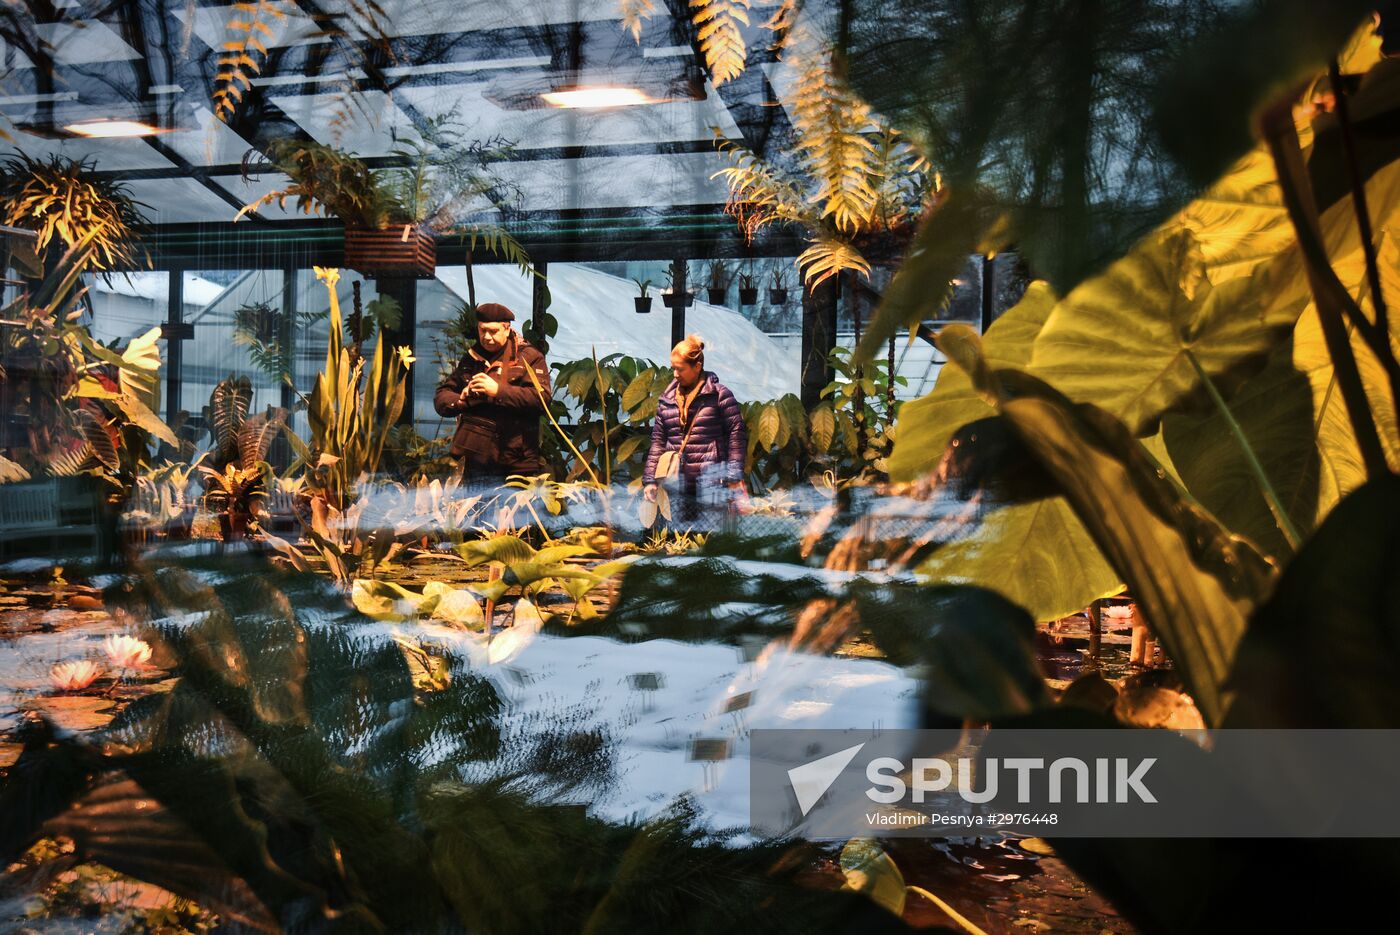 Greenhouse with tropical water lilies opened in Moscow State University's Botanic Garden (Apothecary Garden)